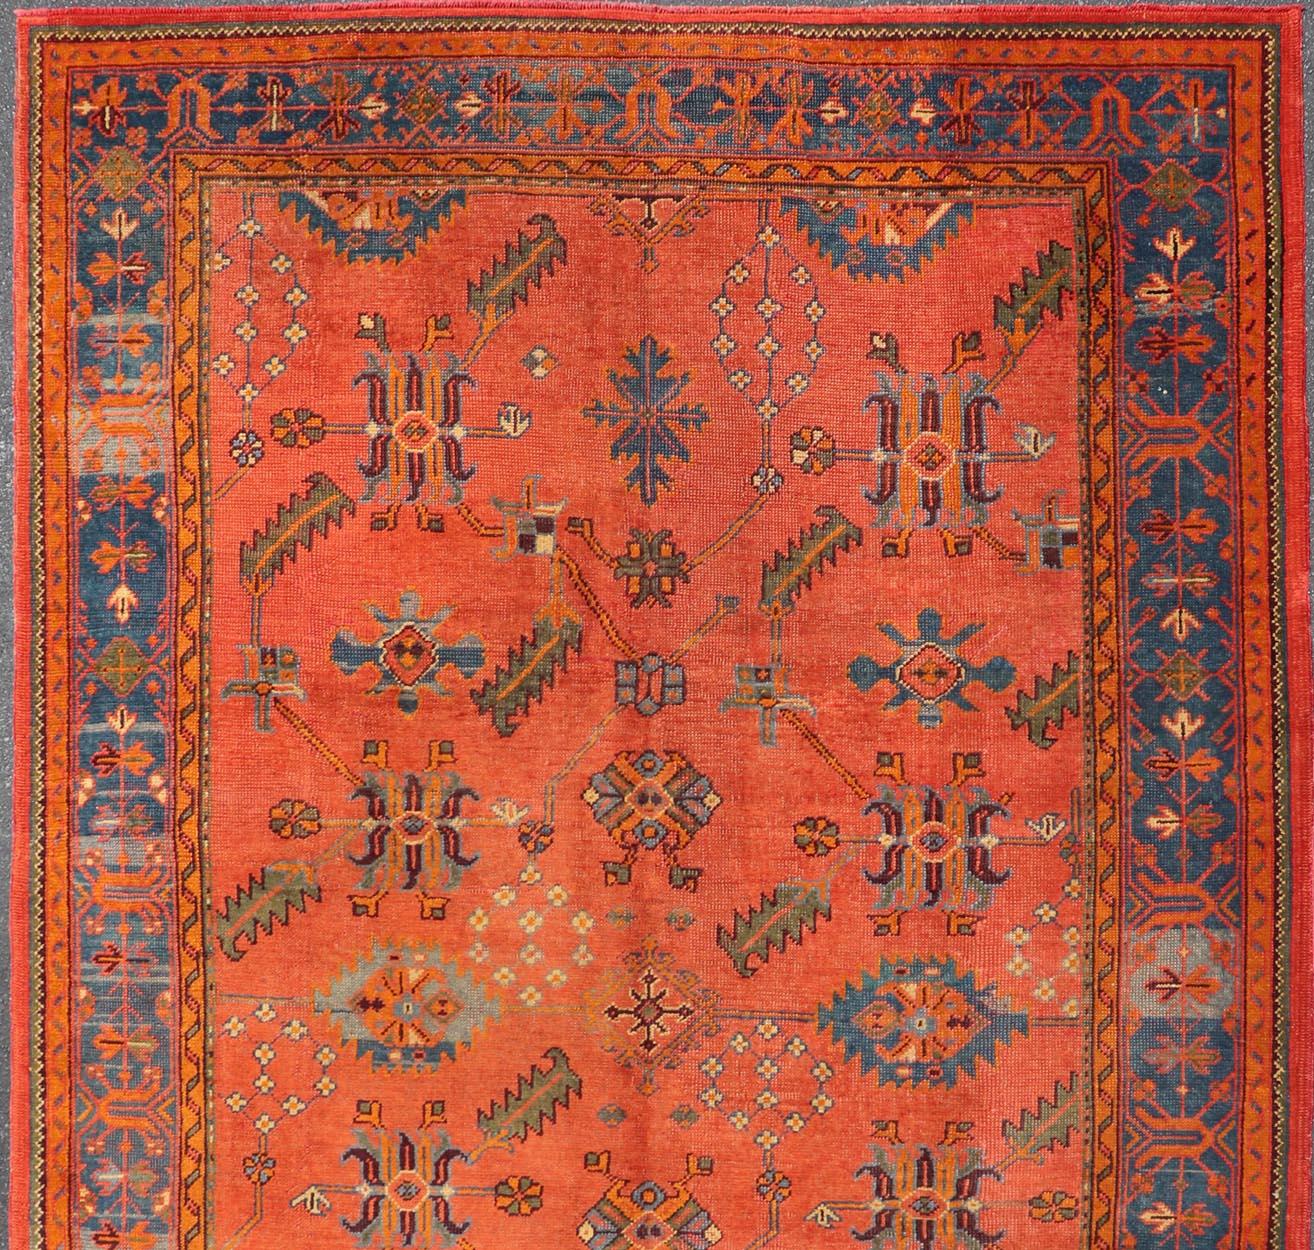 Antique Turkish Oushak Colorful Rug With All-Over Design In Salmon and Blue's  For Sale 4